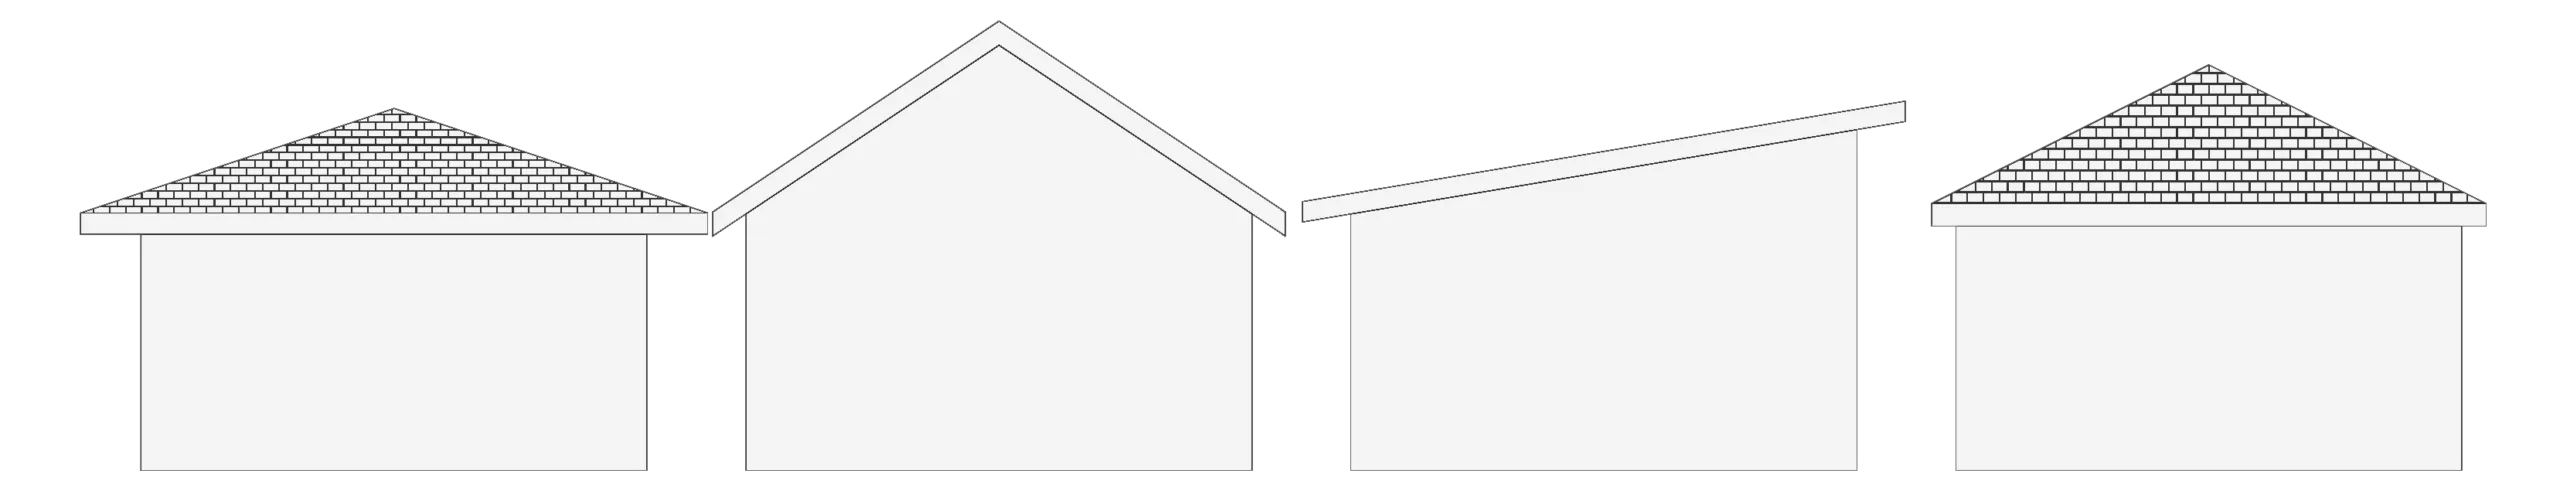 different rooflines in cad software